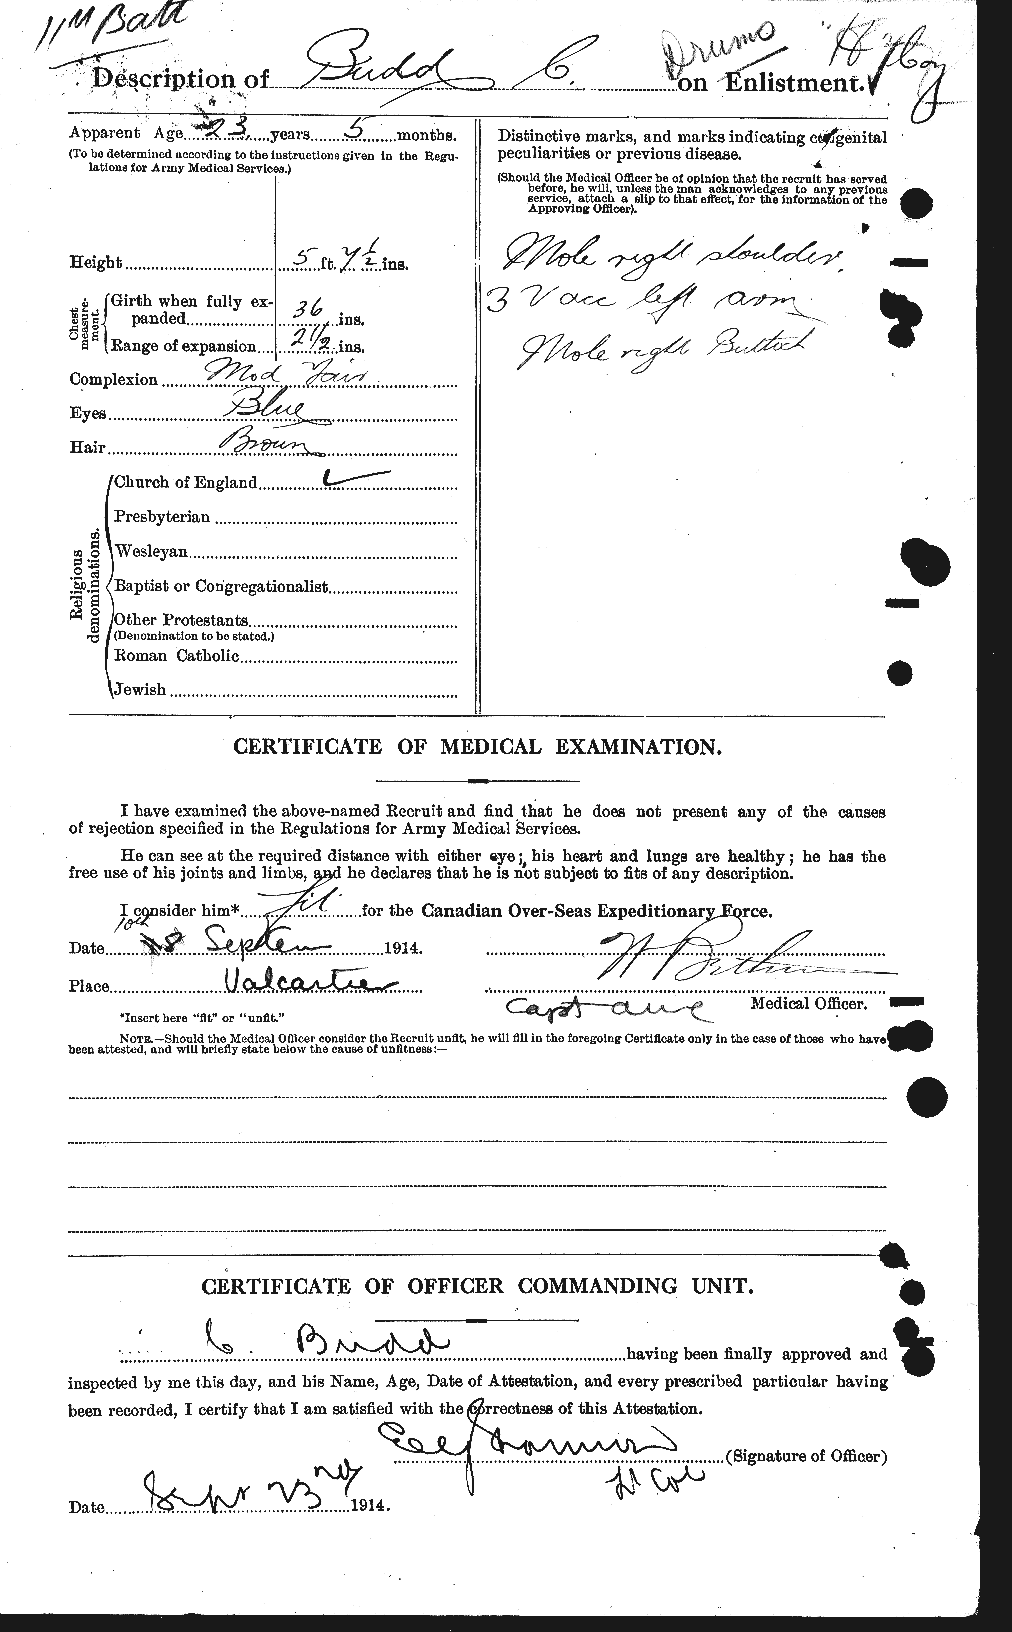 Personnel Records of the First World War - CEF 271288b